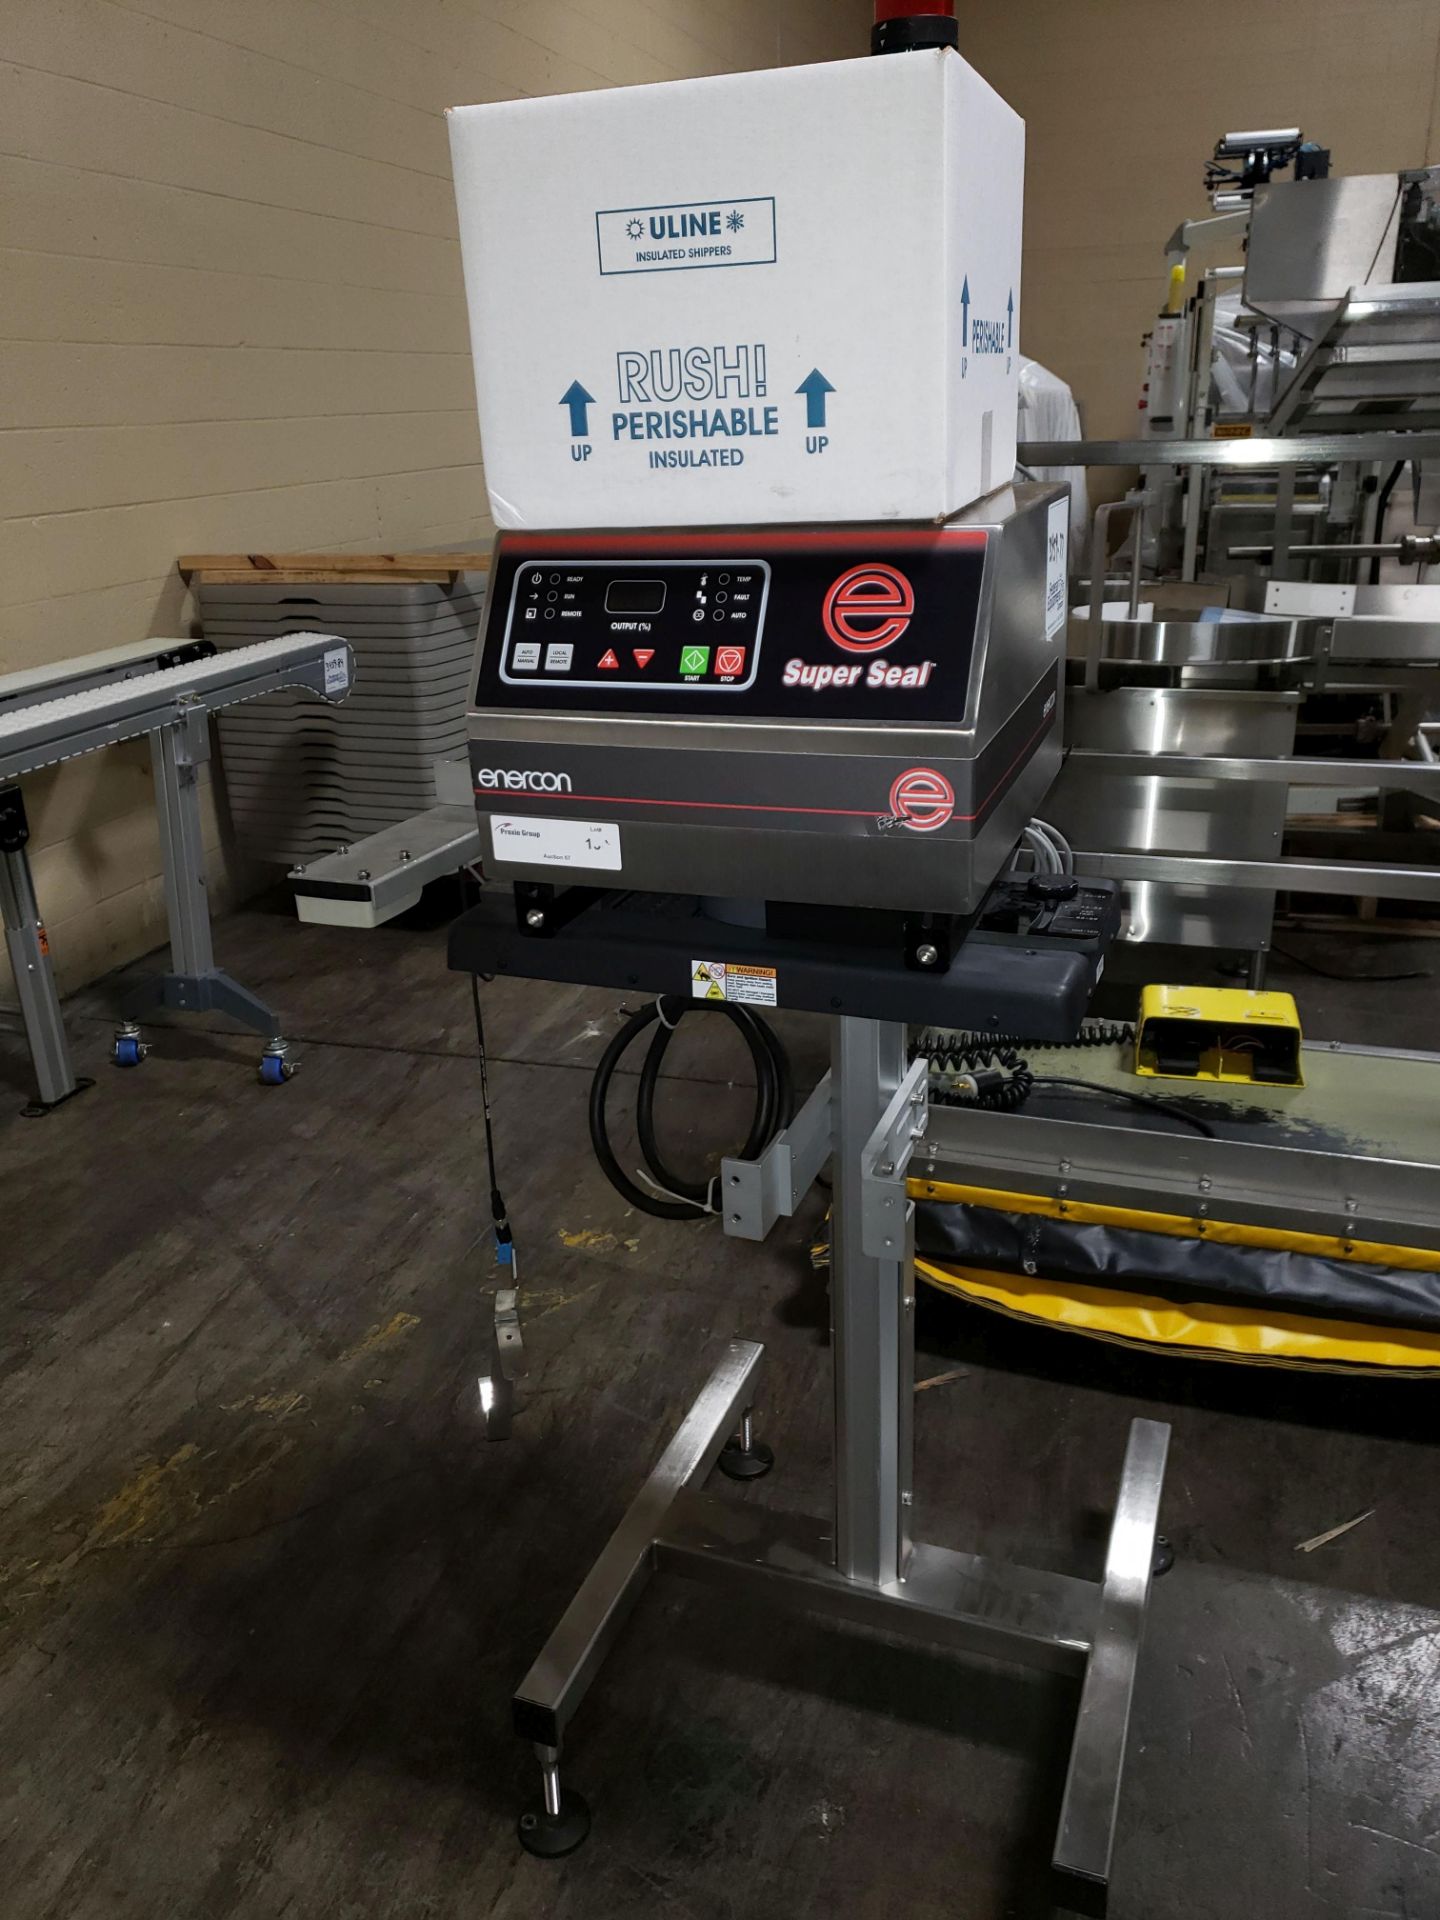 ENERCON SUPERSEAL 100 INDUCTION SEALER, MODEL LM5022-272, 208 VOLTS